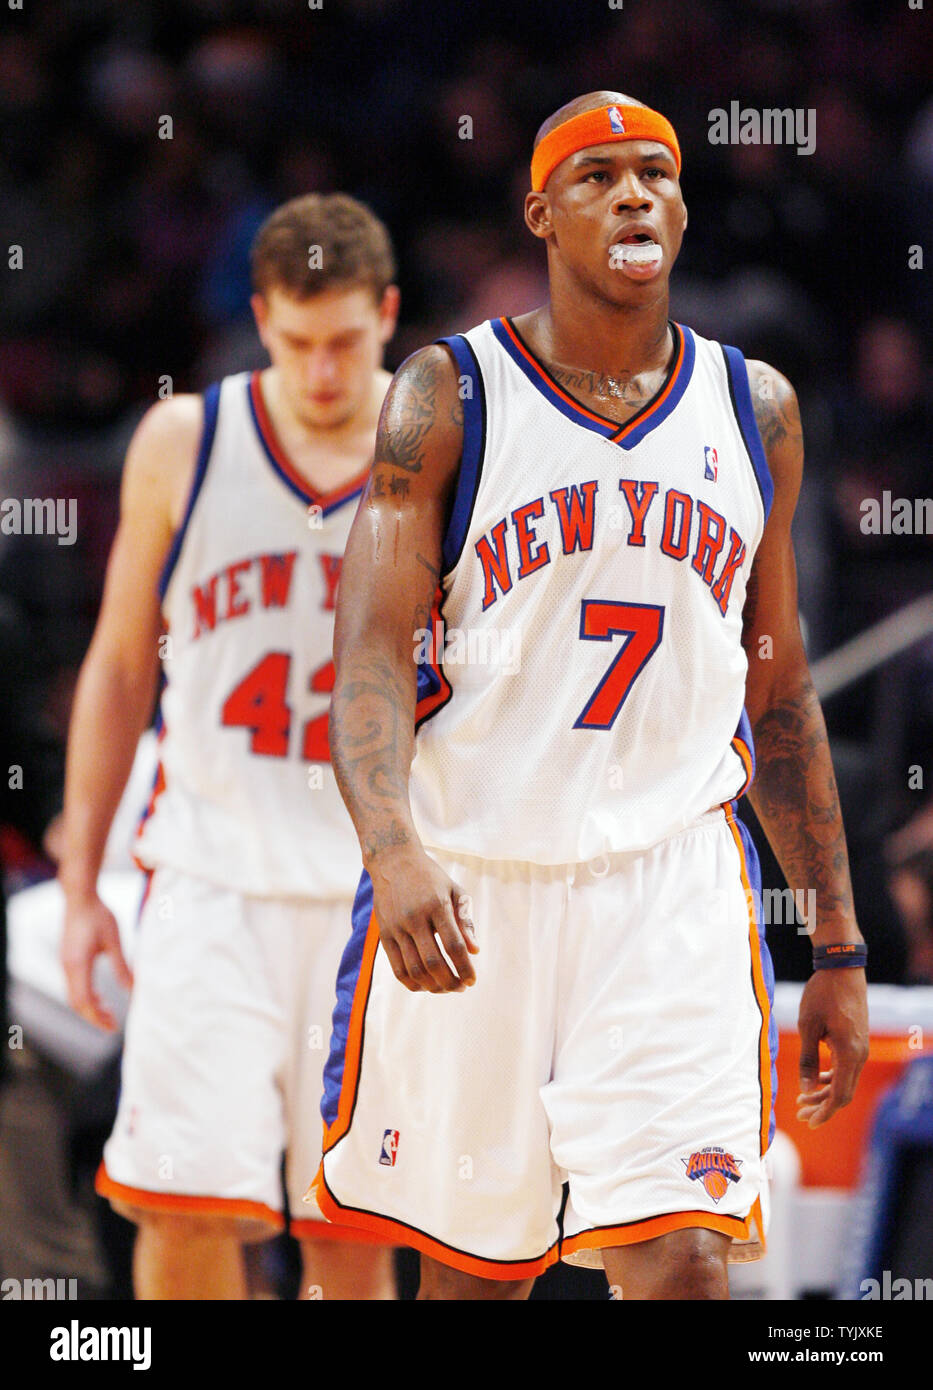 New York Knicks David Lee and Al Harrington (7) walk on the court after a  time out in the fourth quarter against the Minnesota Timberwolves at  Madison Square Garden in New York